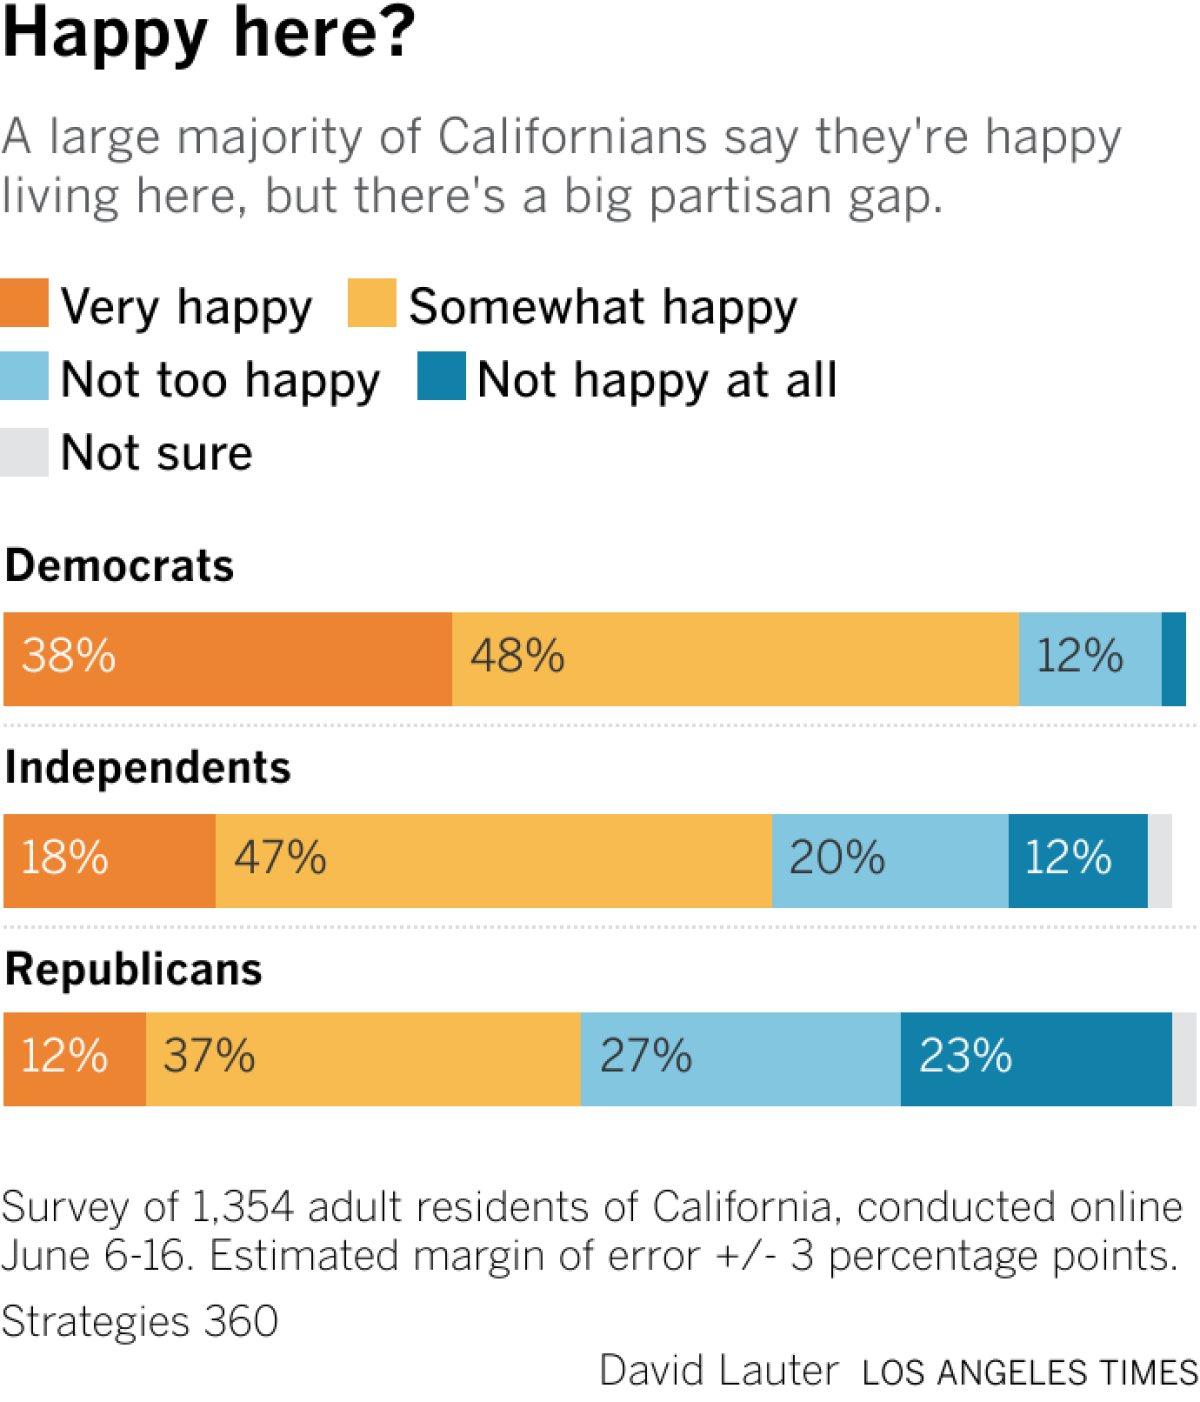 A large majority of Californians say they're happy living here, but there's a big partisan gap.